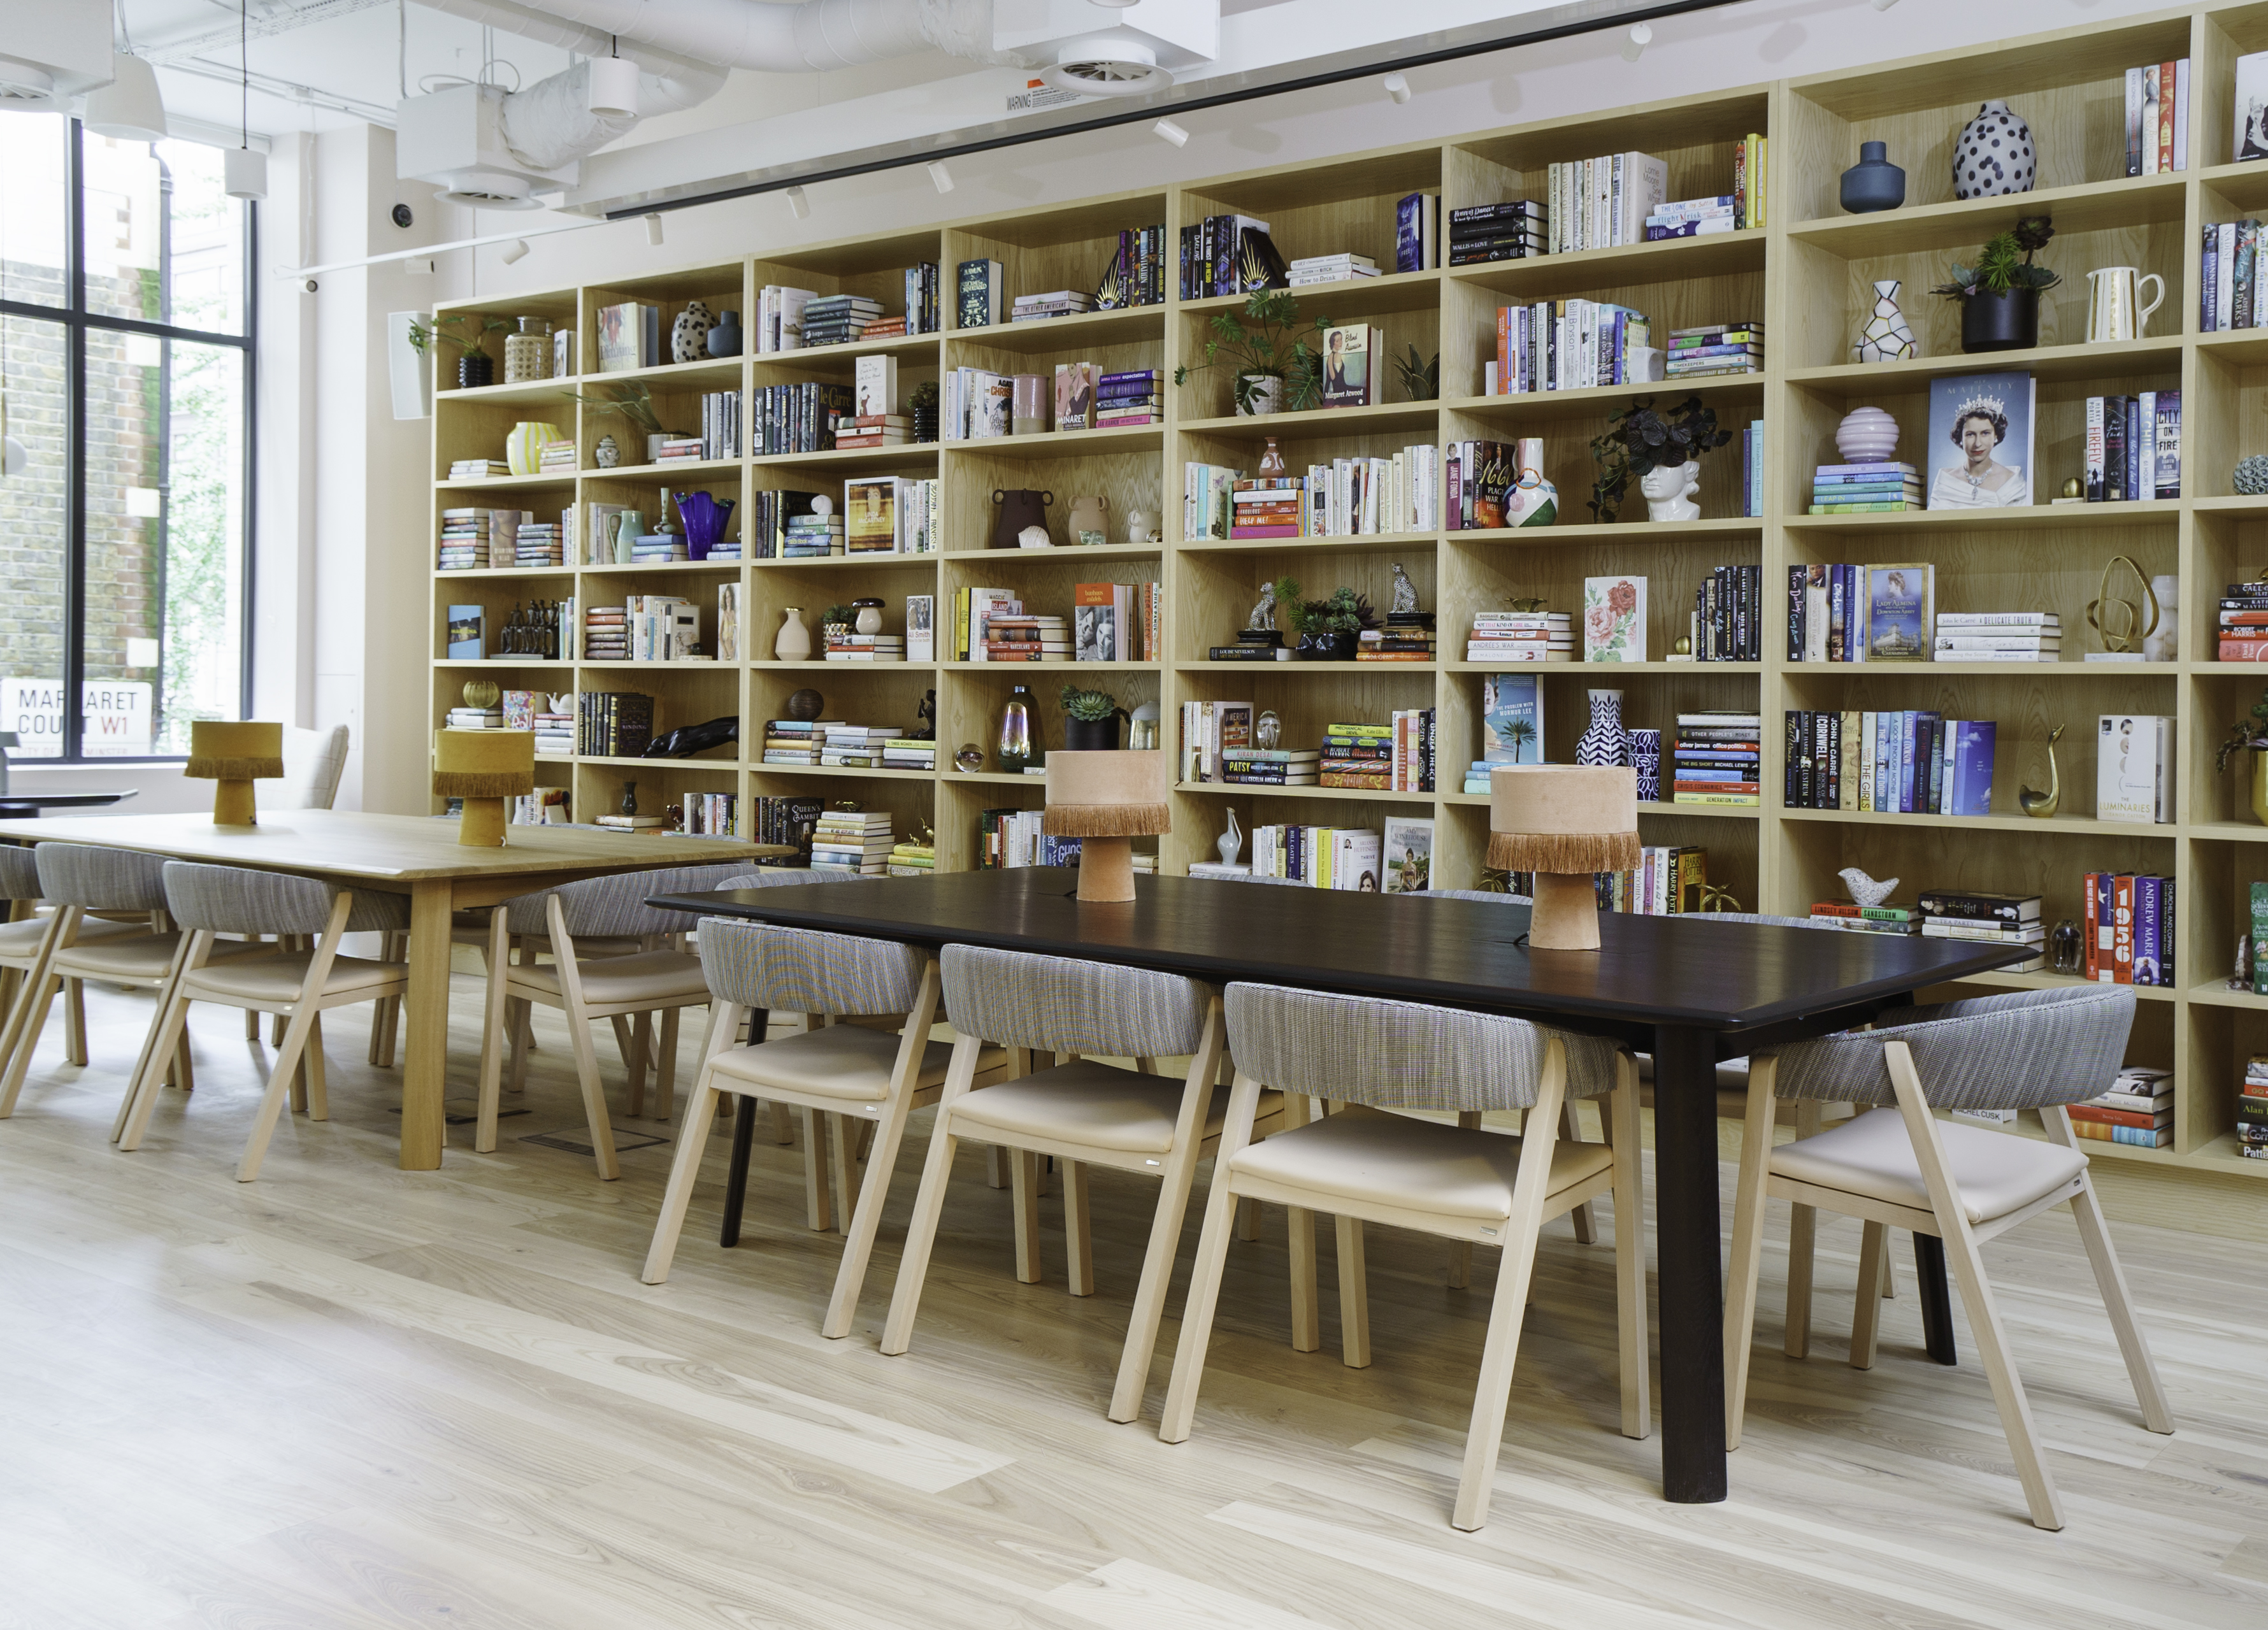 The Ladies Library and a co-working area at The Wing's new London location. (Tory Williams)